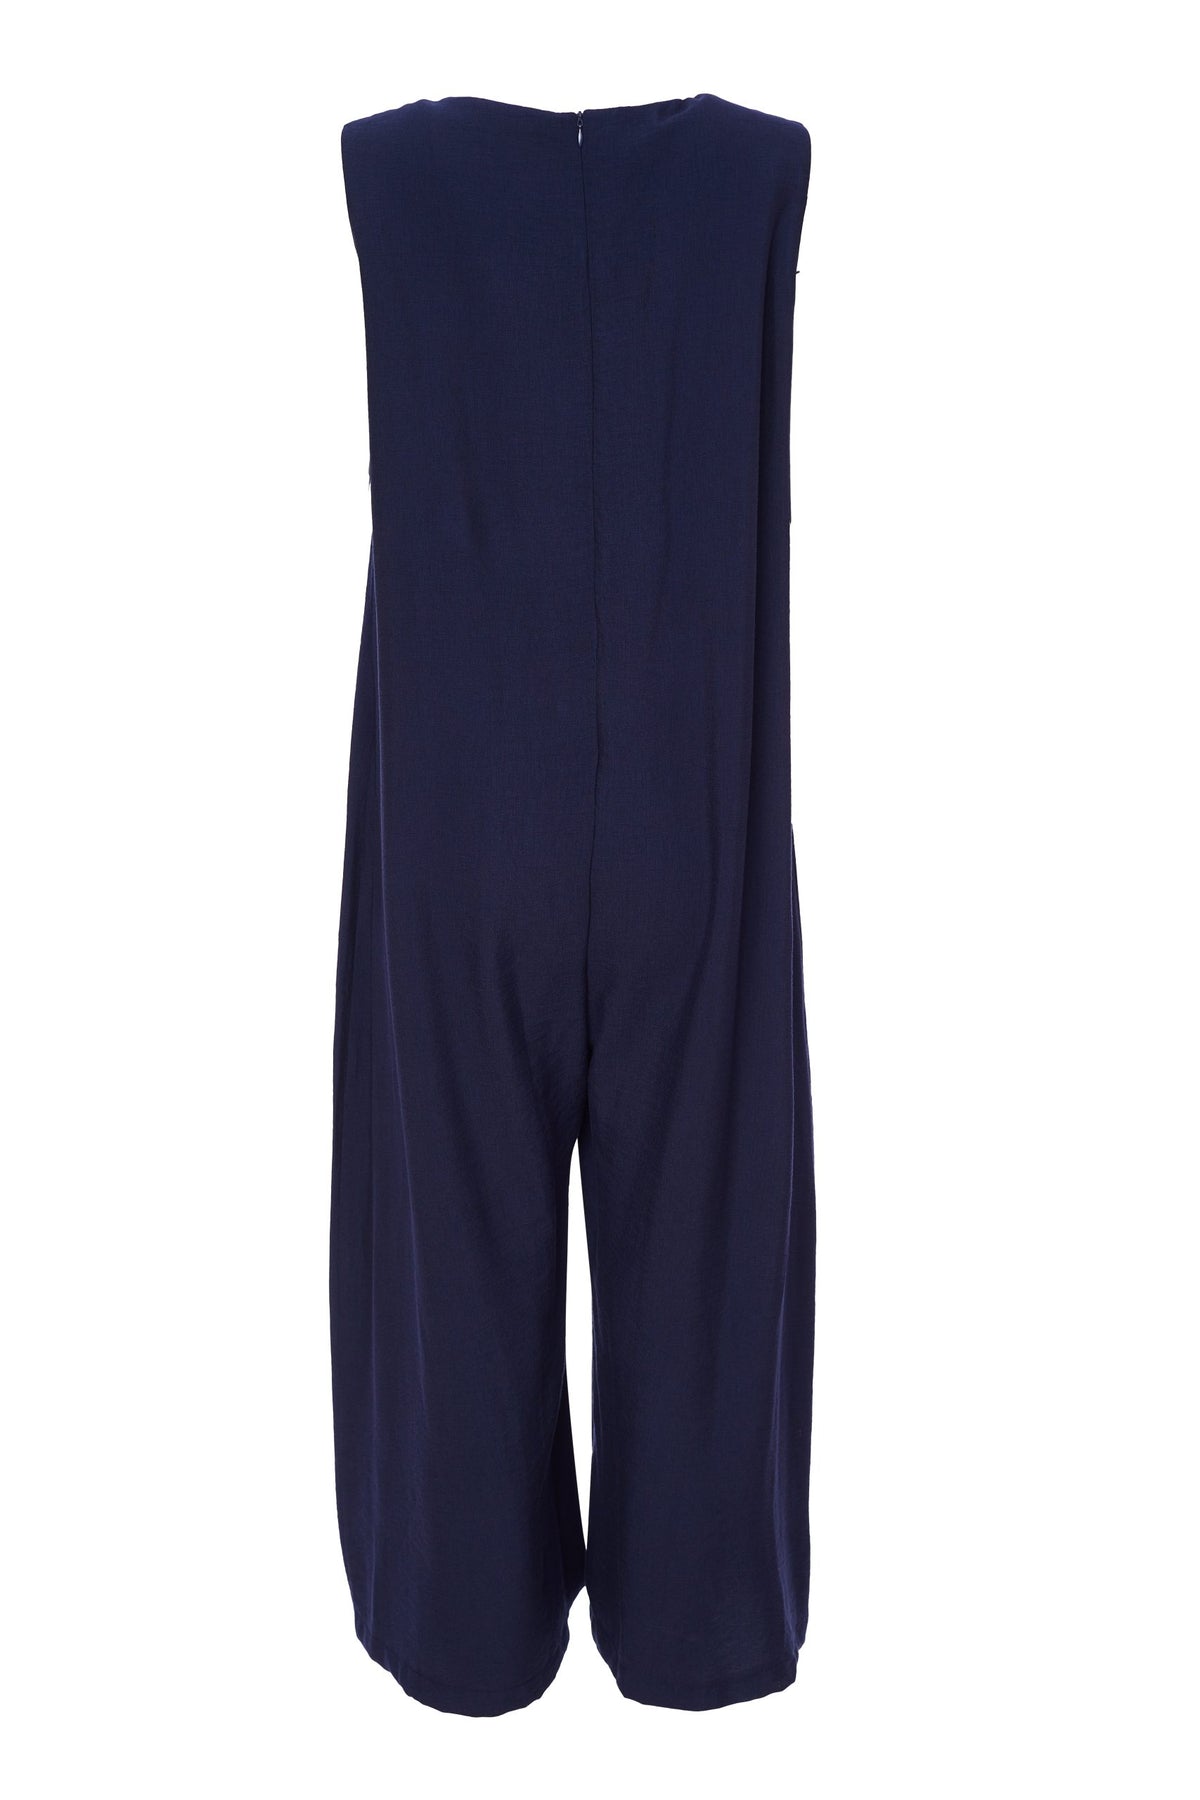 NAS24183 Jumpsuit With Contrast Inset NAYA